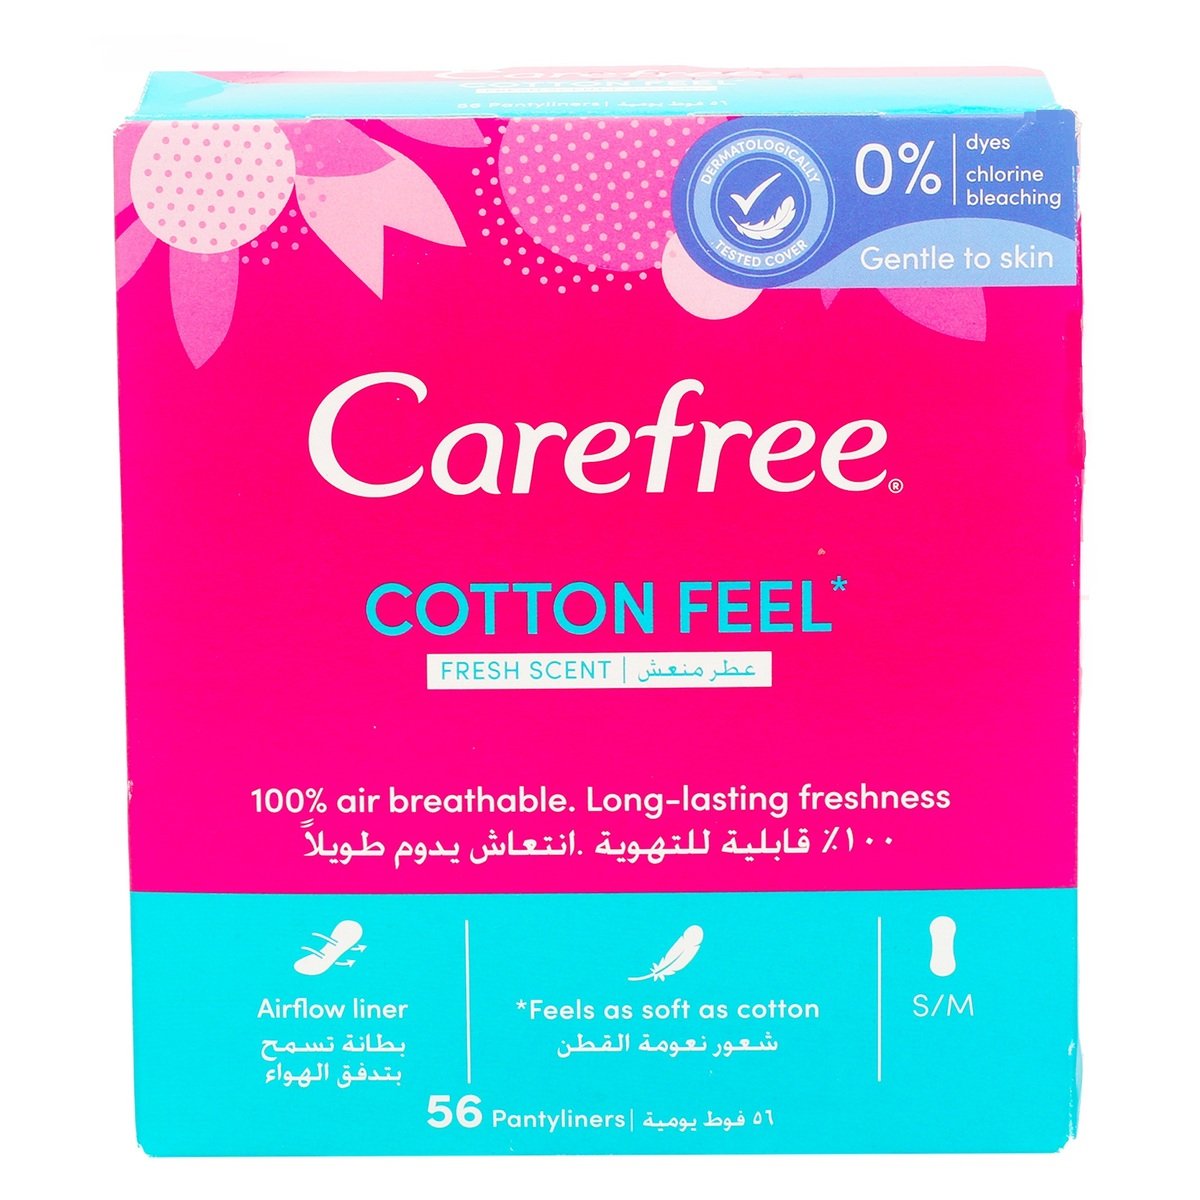 Carefree Cotton feel, Unscented, Pantyliners Pack of 76 price in UAE,  UAE